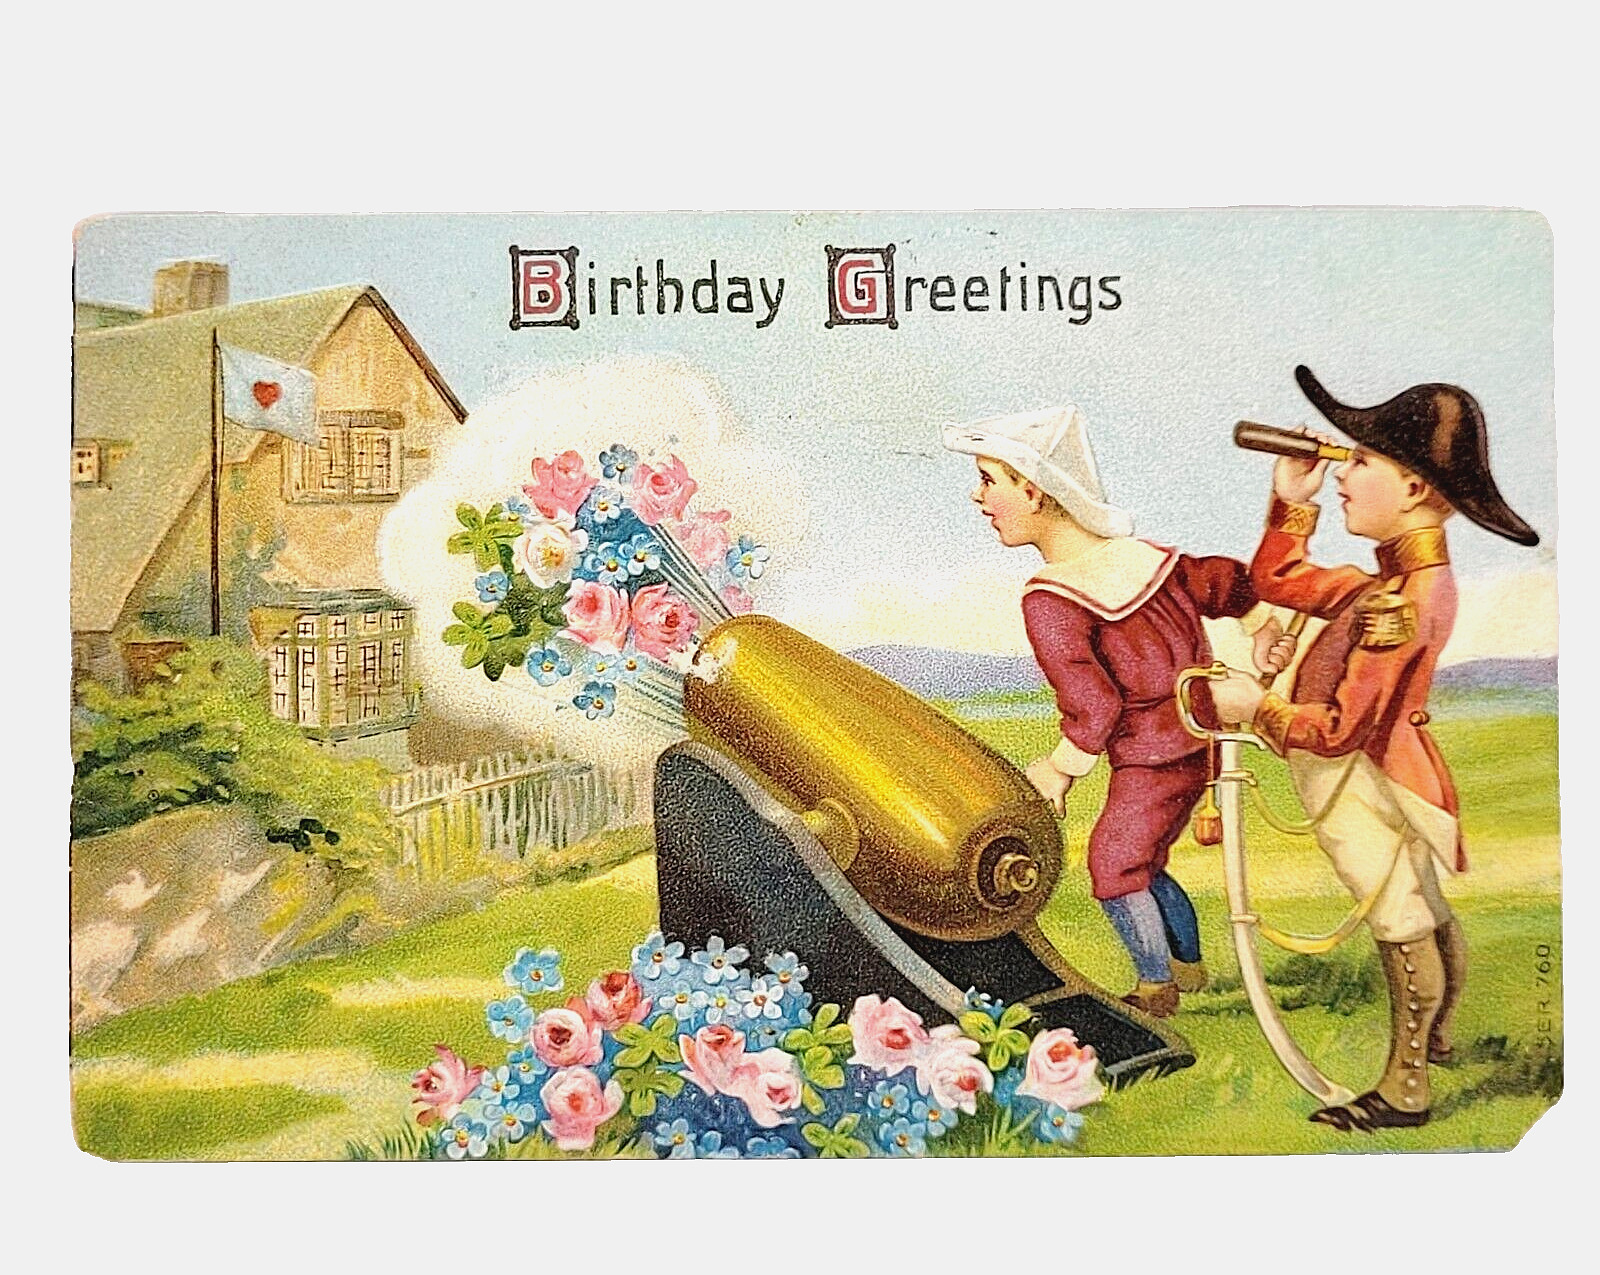 Birthday Greetings Military Kids Shoot Flowers Canon 1910s Postcard Cancel Stamp